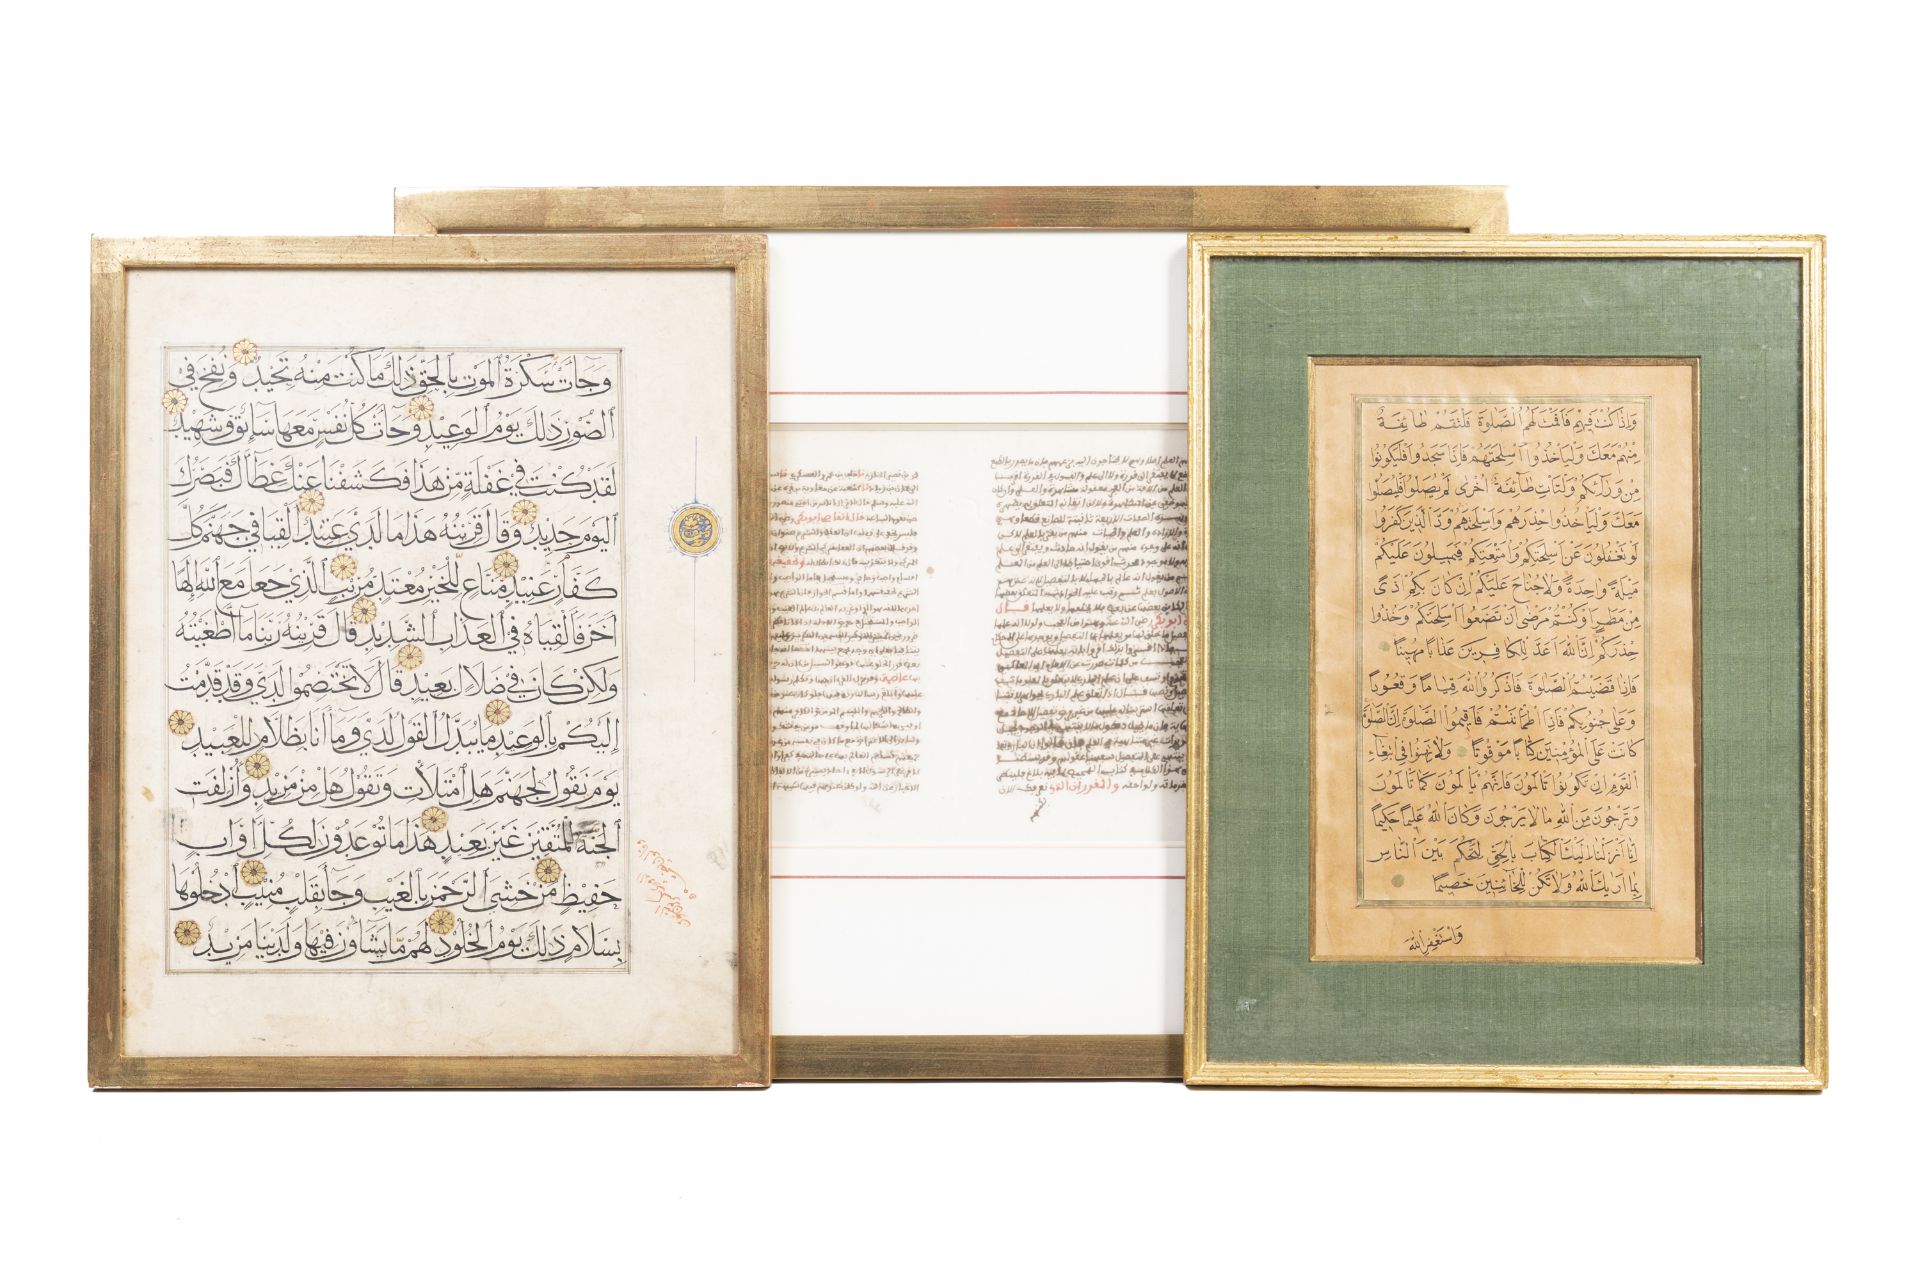 Three Islamic text fragments, ink and colours on paper, 19th C. or earlier